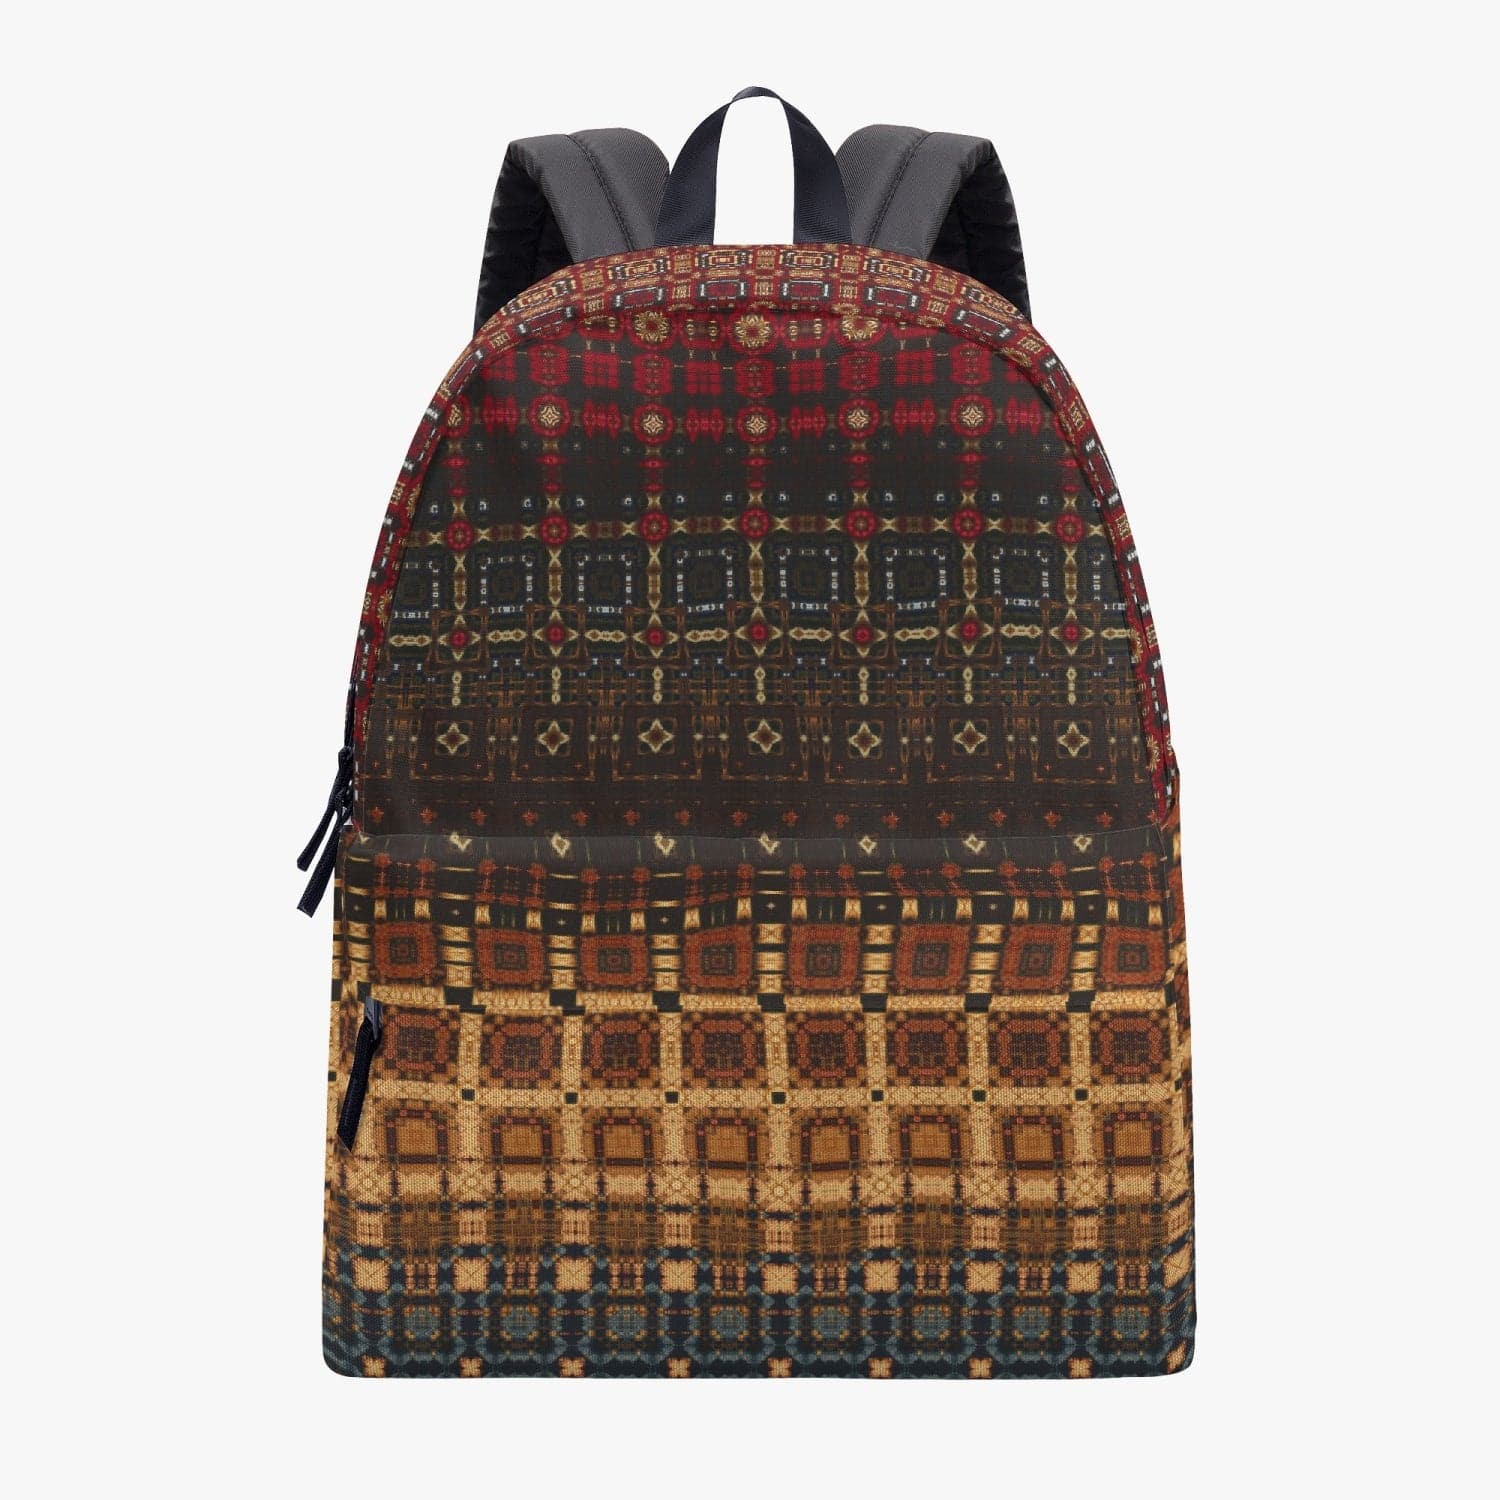 Orange and brown patterned Cotton Canvas Backpack, by Sensus Studio Design